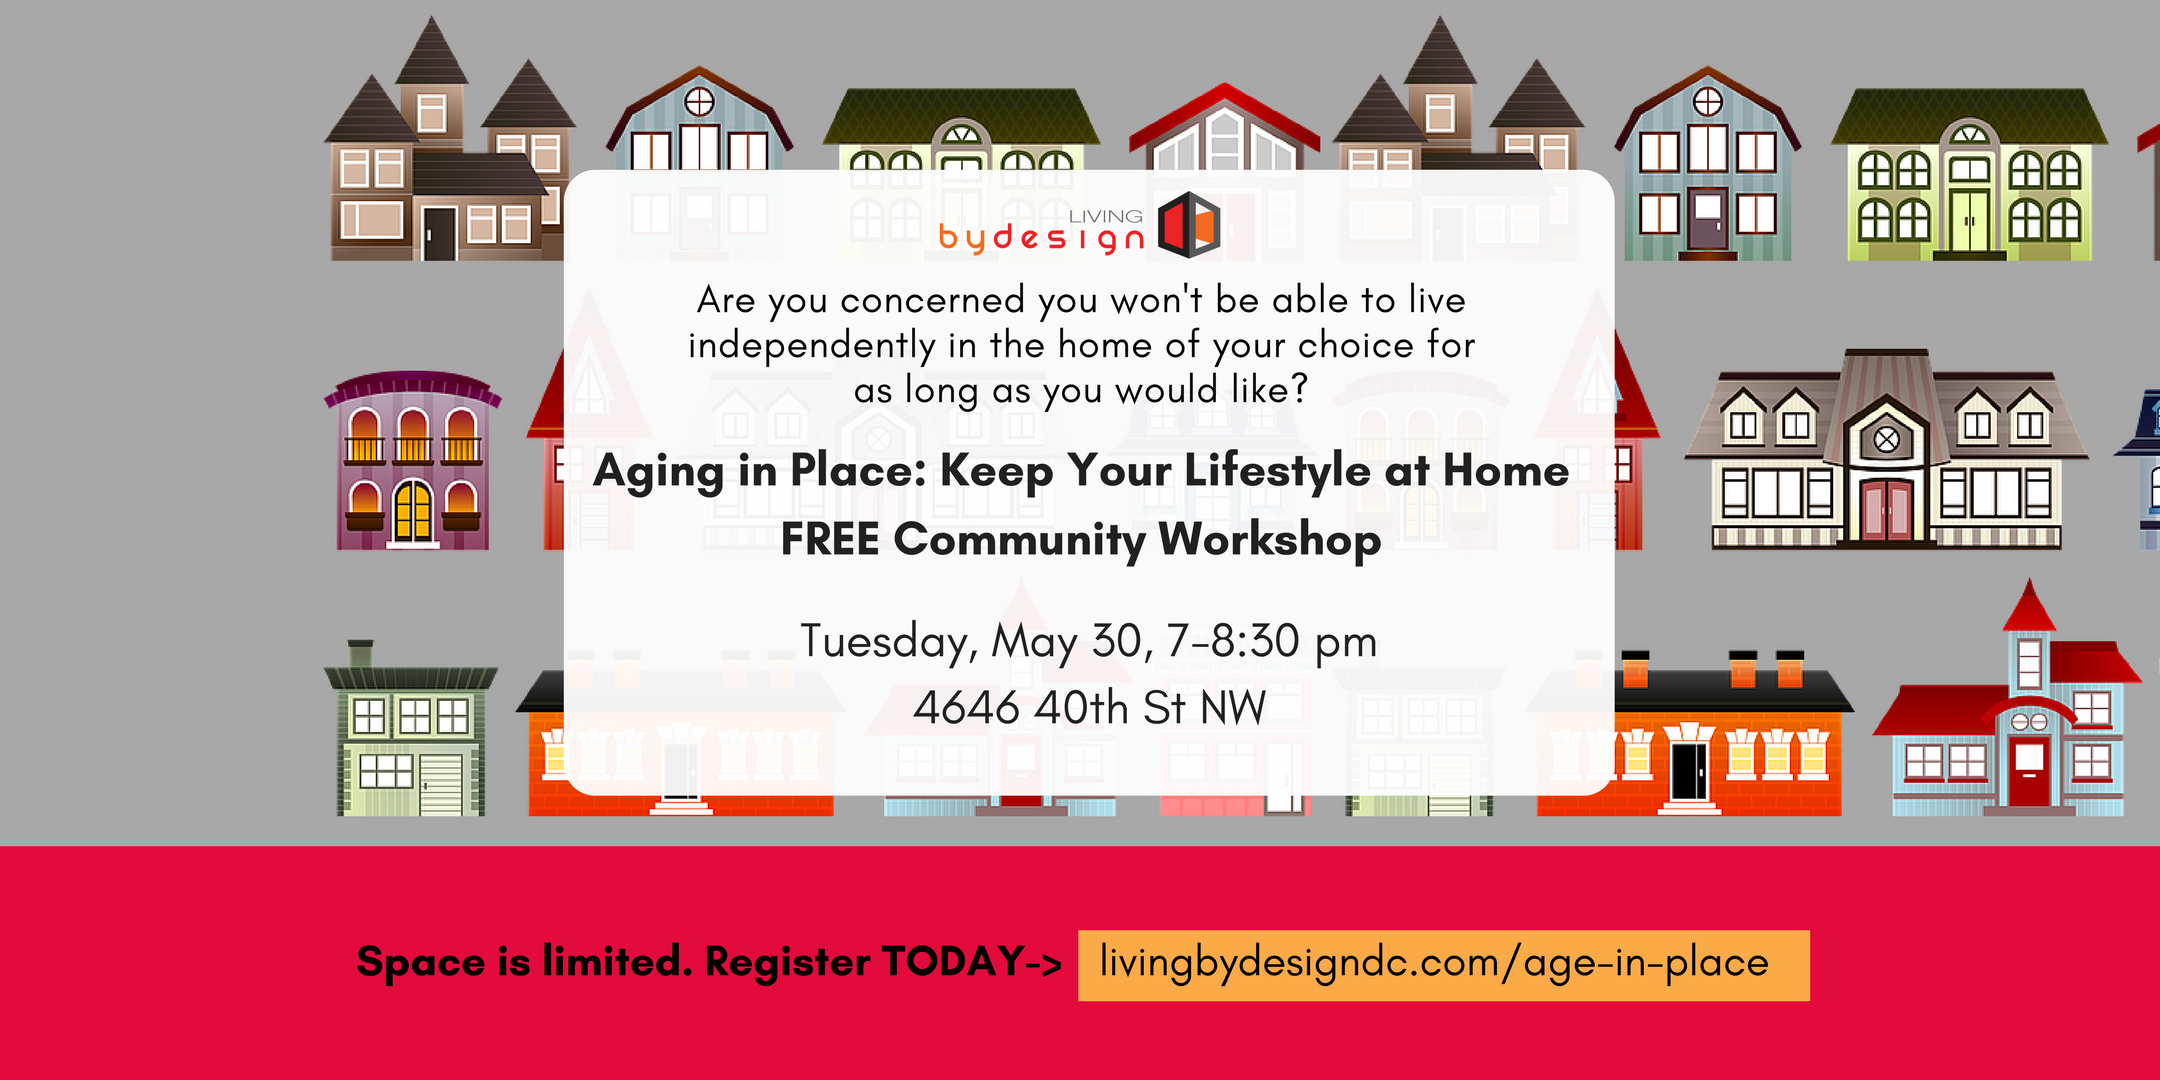 Aging in Place: Keep Your Lifestyle at Home